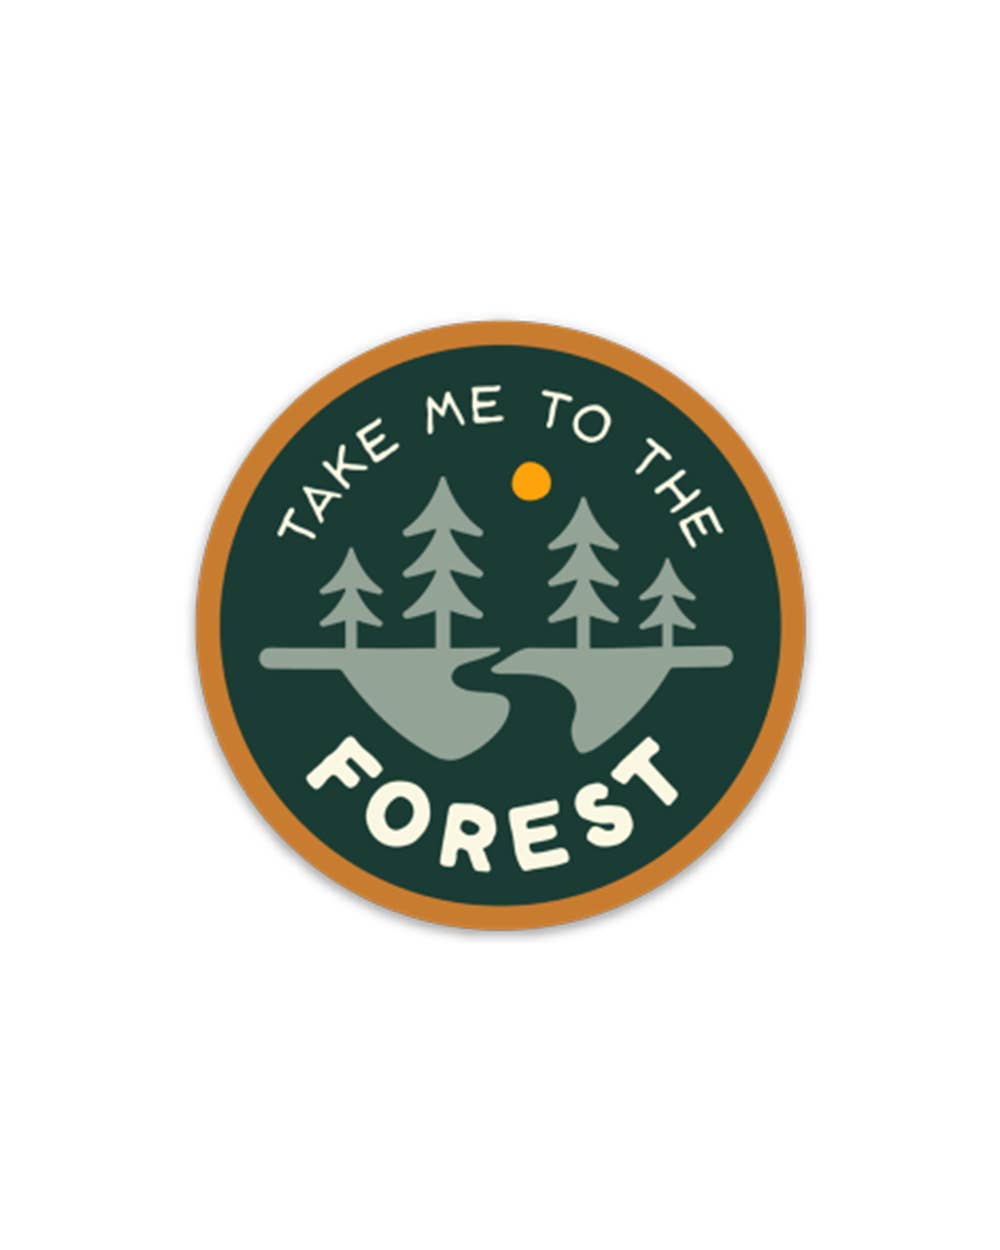 Take me to the forest round sticker by Keep Nature Wild